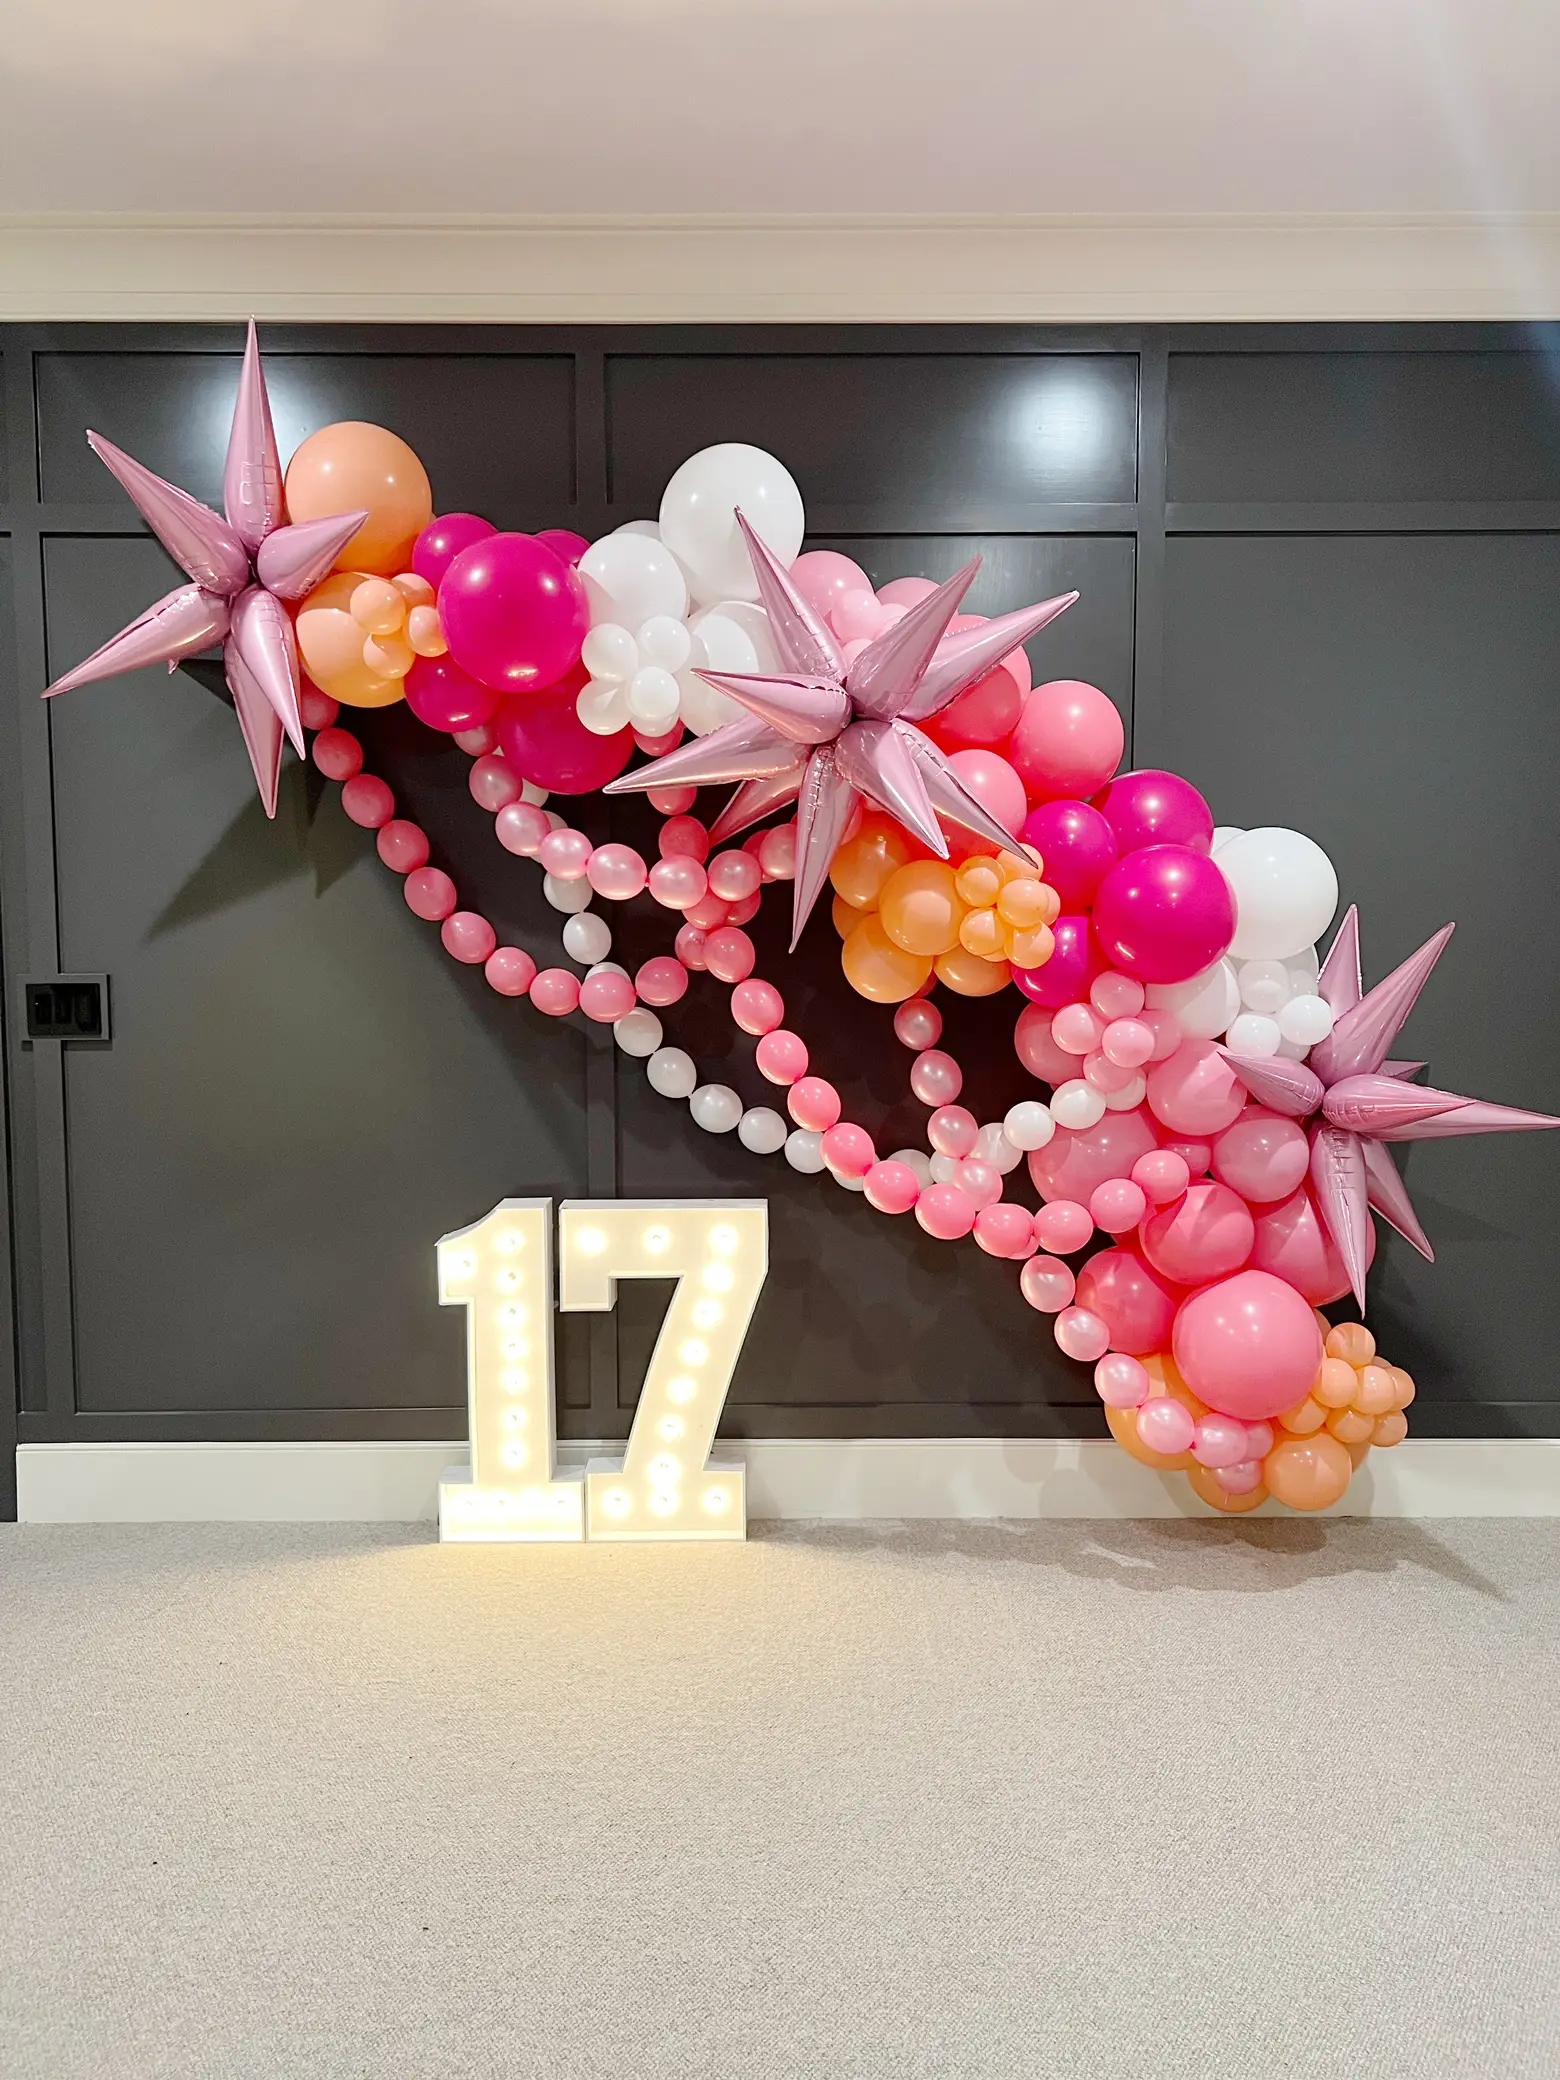 How to Make Balloon Curly - How to curl 260Q balloons - Balloon Curly Q 